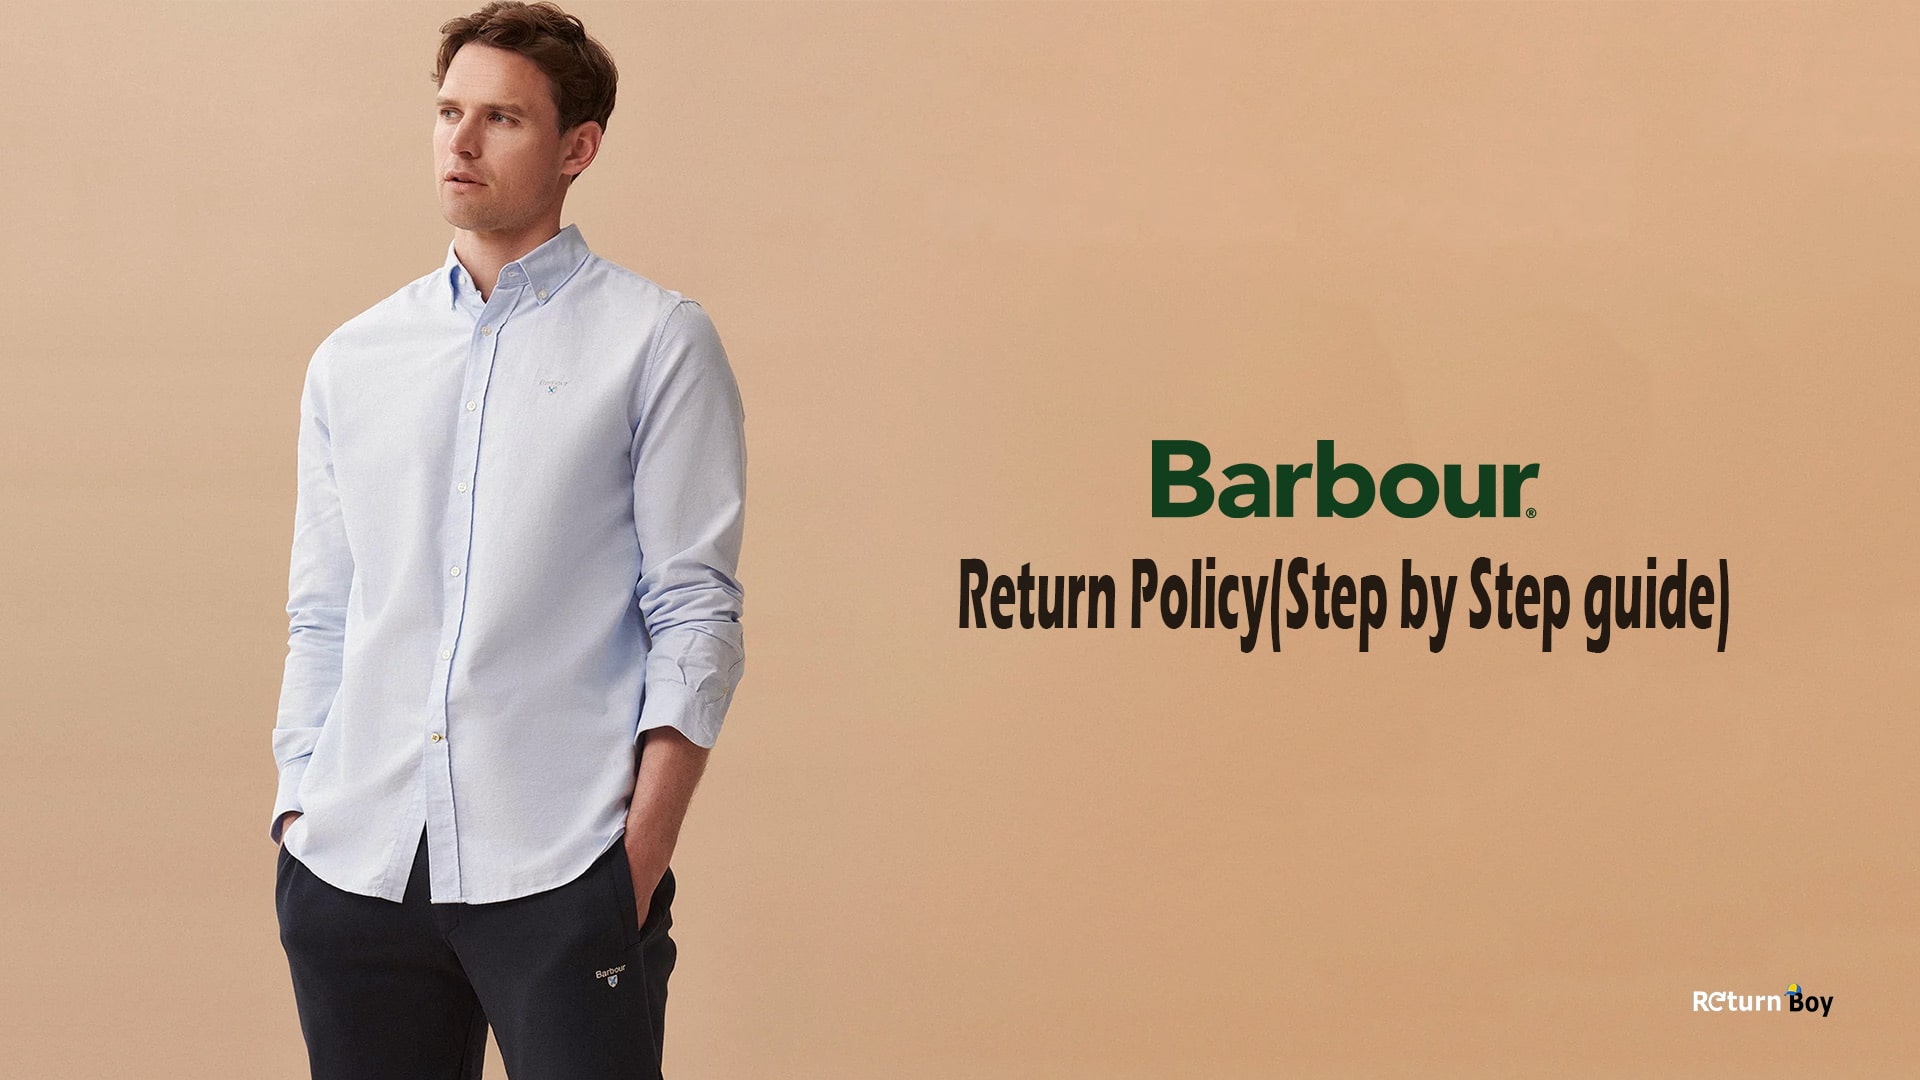 Barbour Returns and Refunds Policy